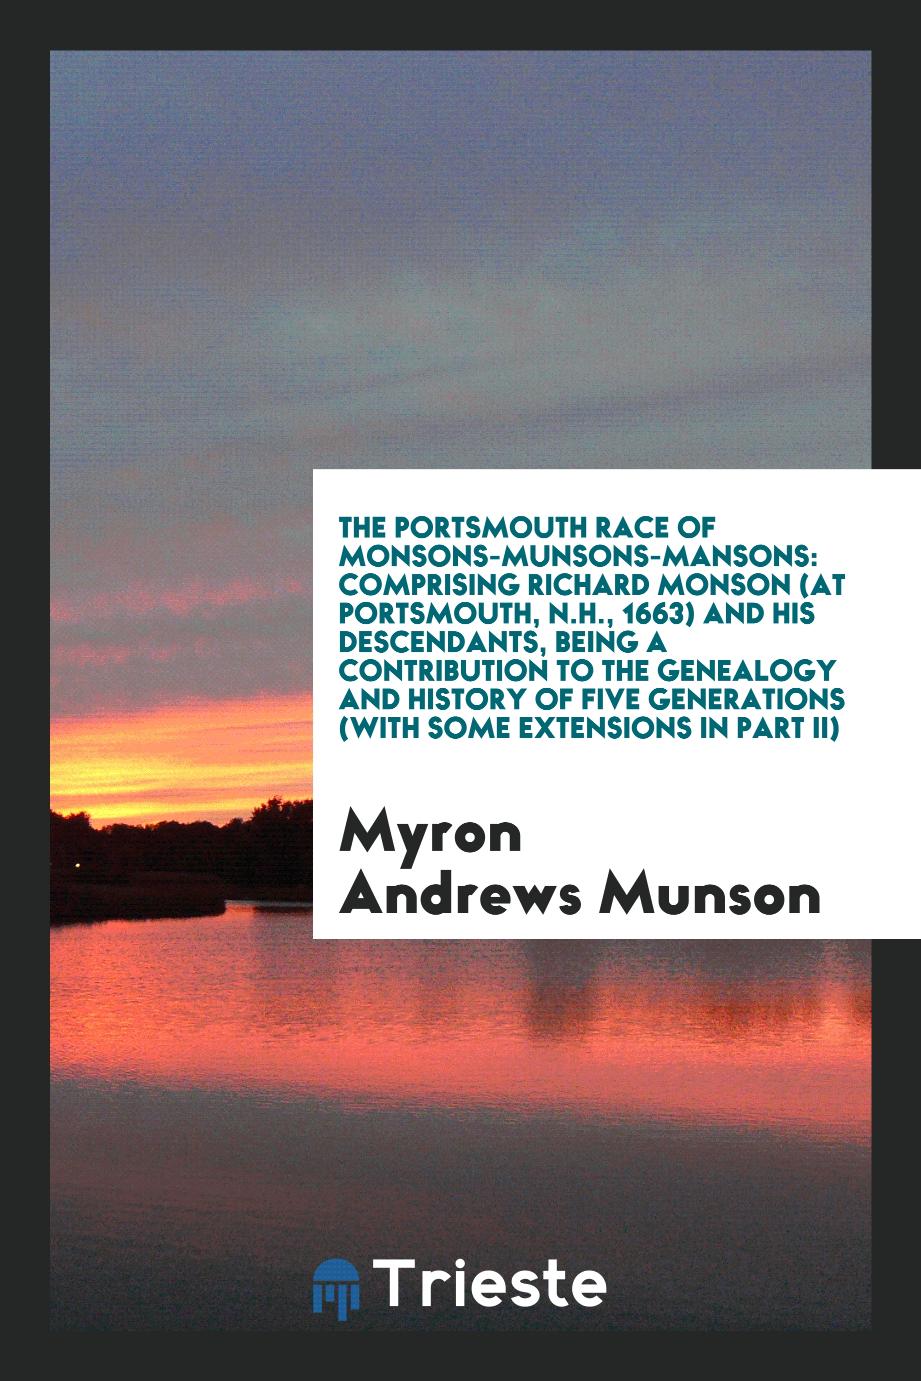 The Portsmouth Race of Monsons-Munsons-Mansons: Comprising Richard Monson (at Portsmouth, N.H., 1663) and His Descendants, Being a Contribution to the Genealogy and History of Five Generations (with Some Extensions in Part II)